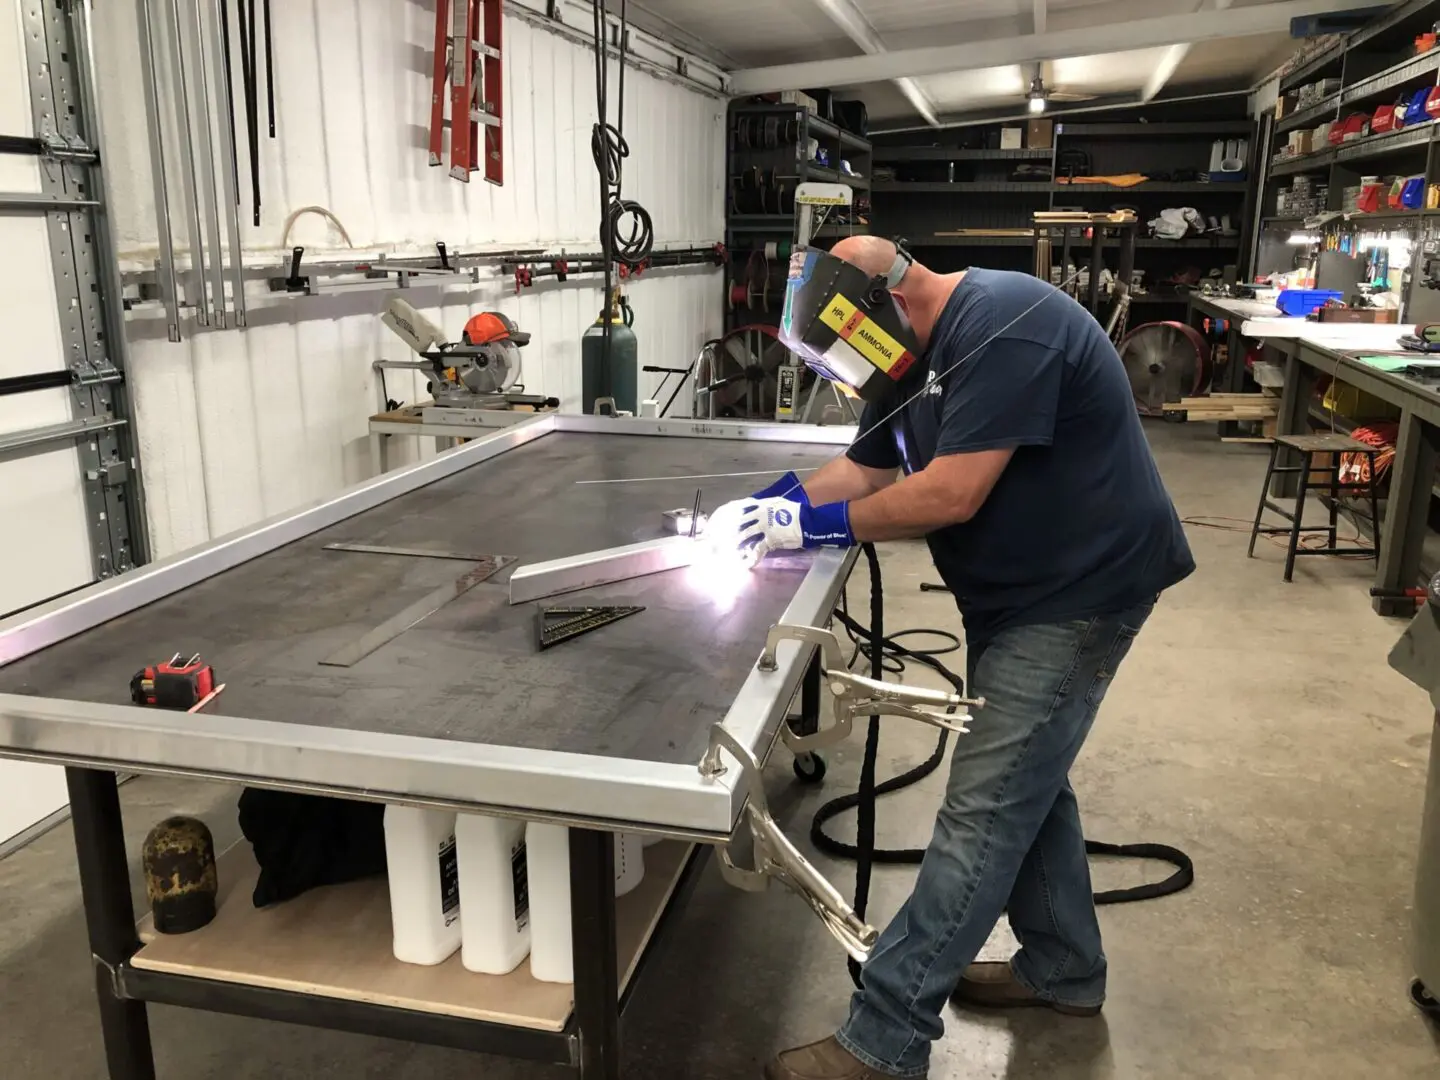 Welding work in progress during table construction